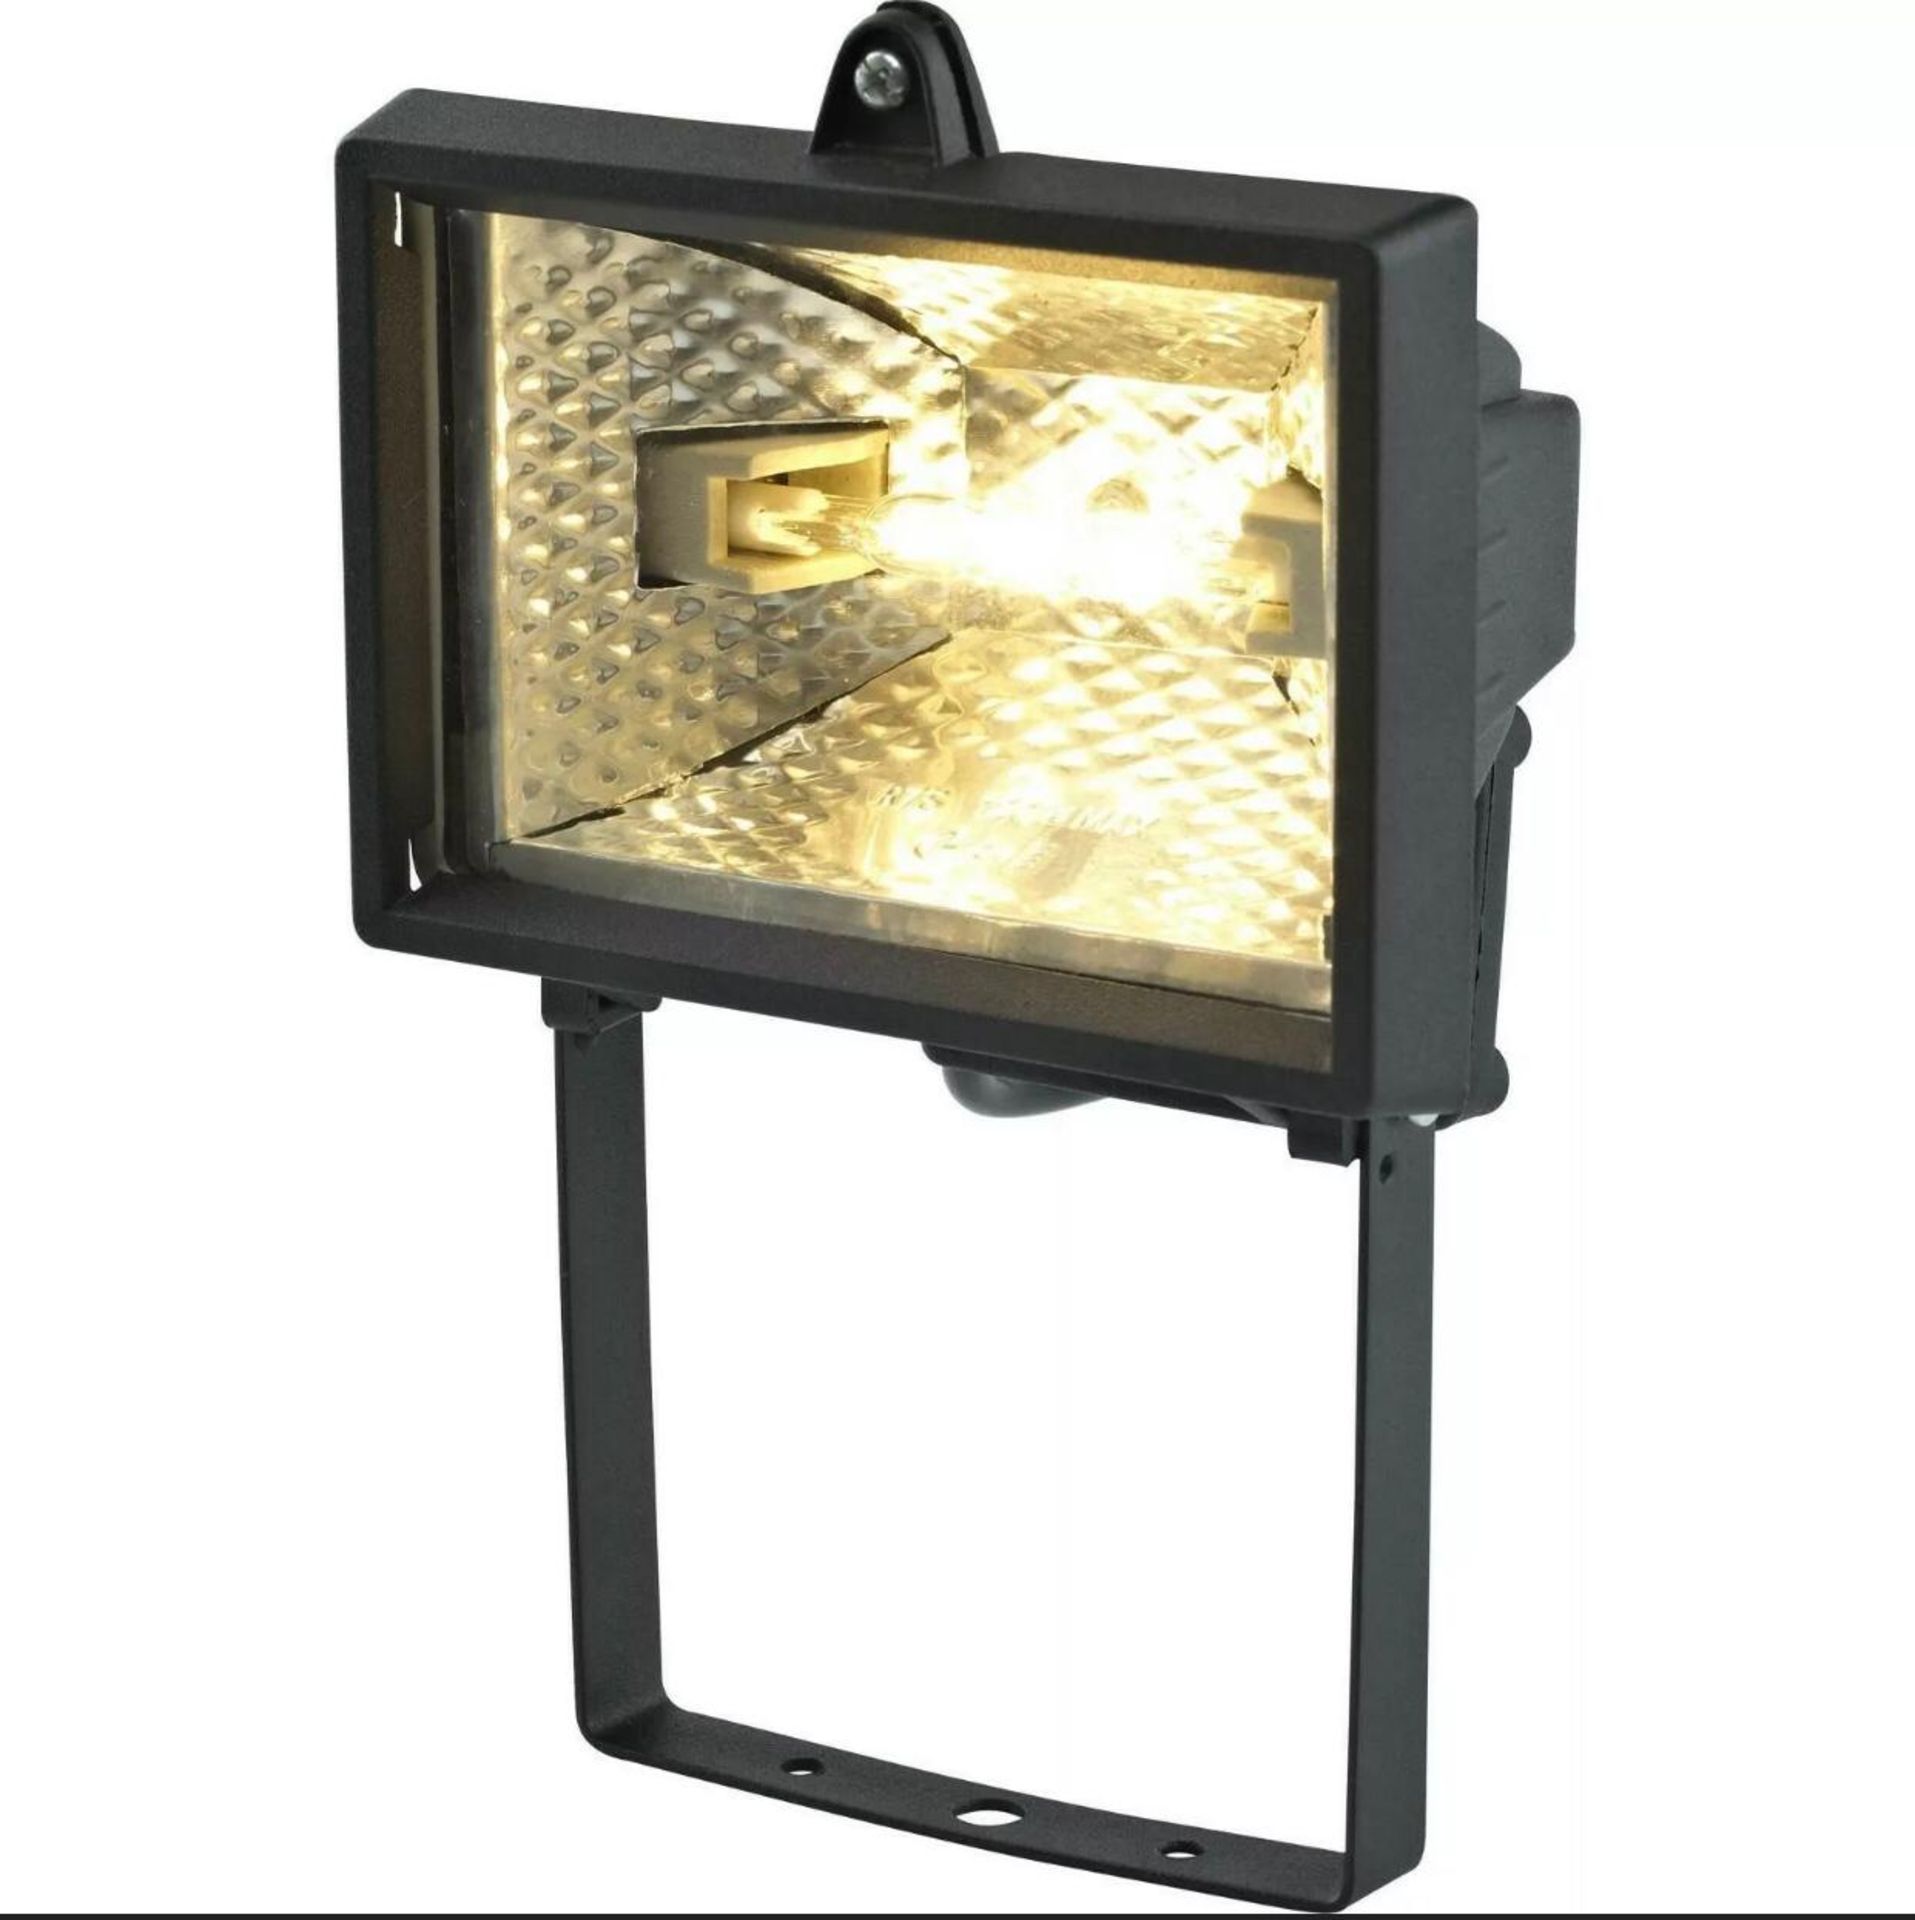 30 x New & Boxed 120W Floodlights